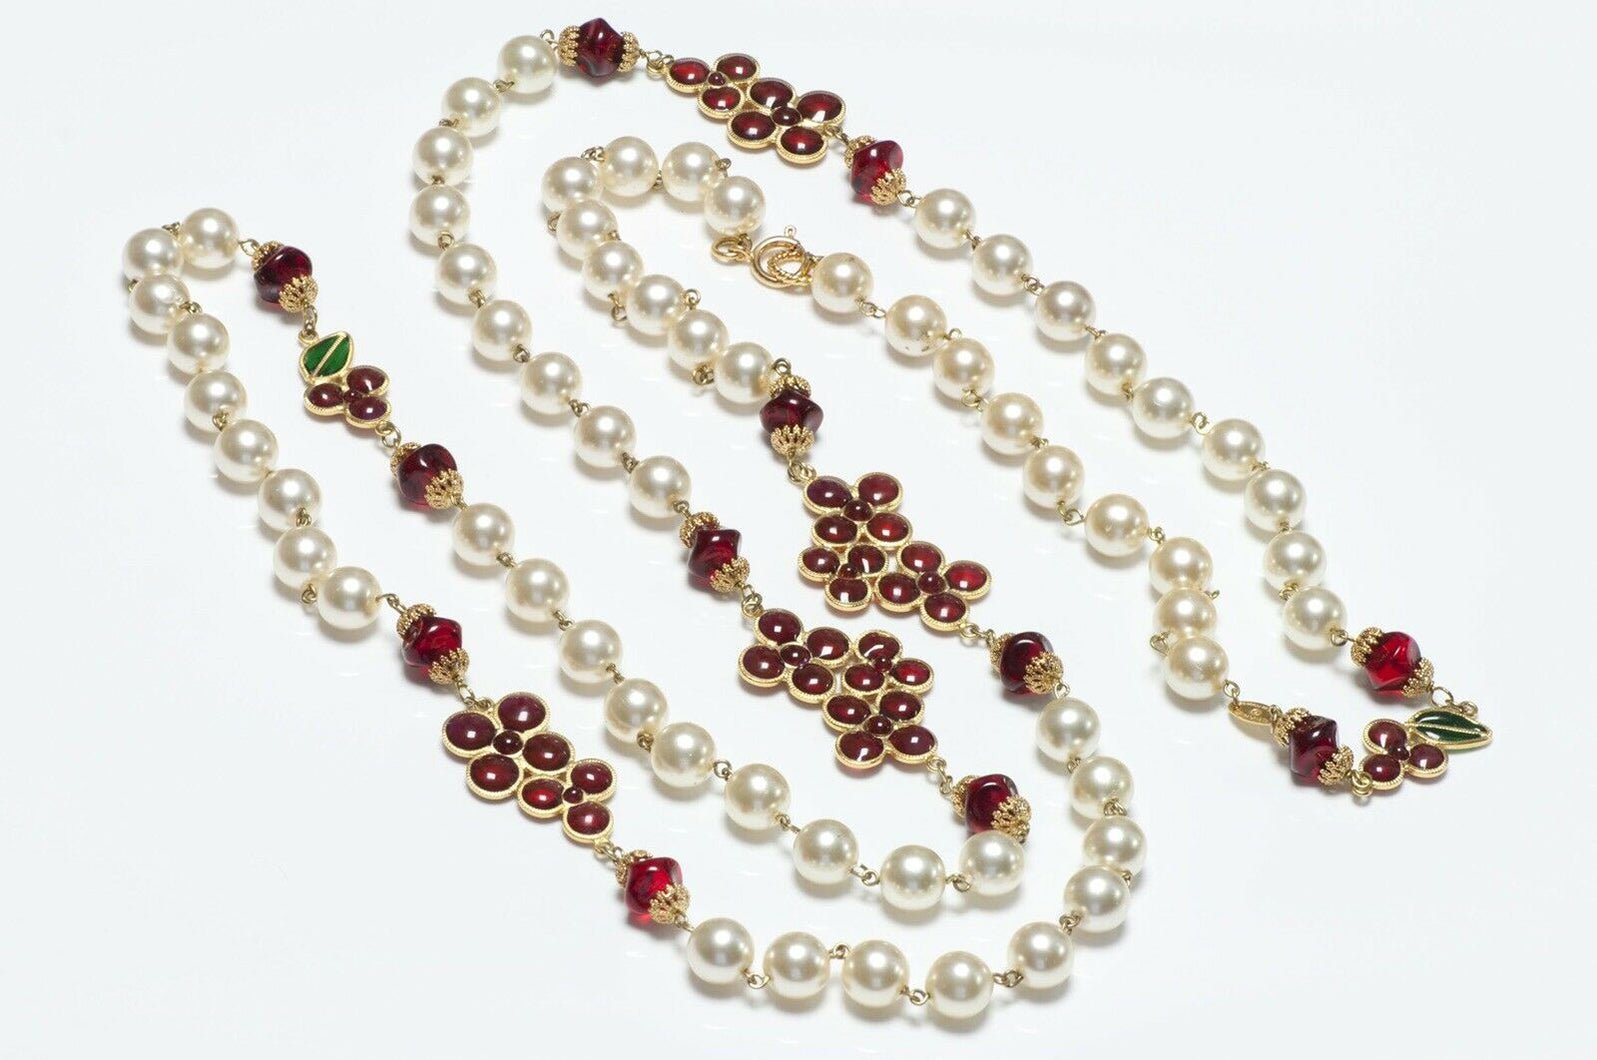 CHANEL 1990’s Gripoix Camellia Glass Pearl Sautoir Necklace - DSF Antique Jewelry